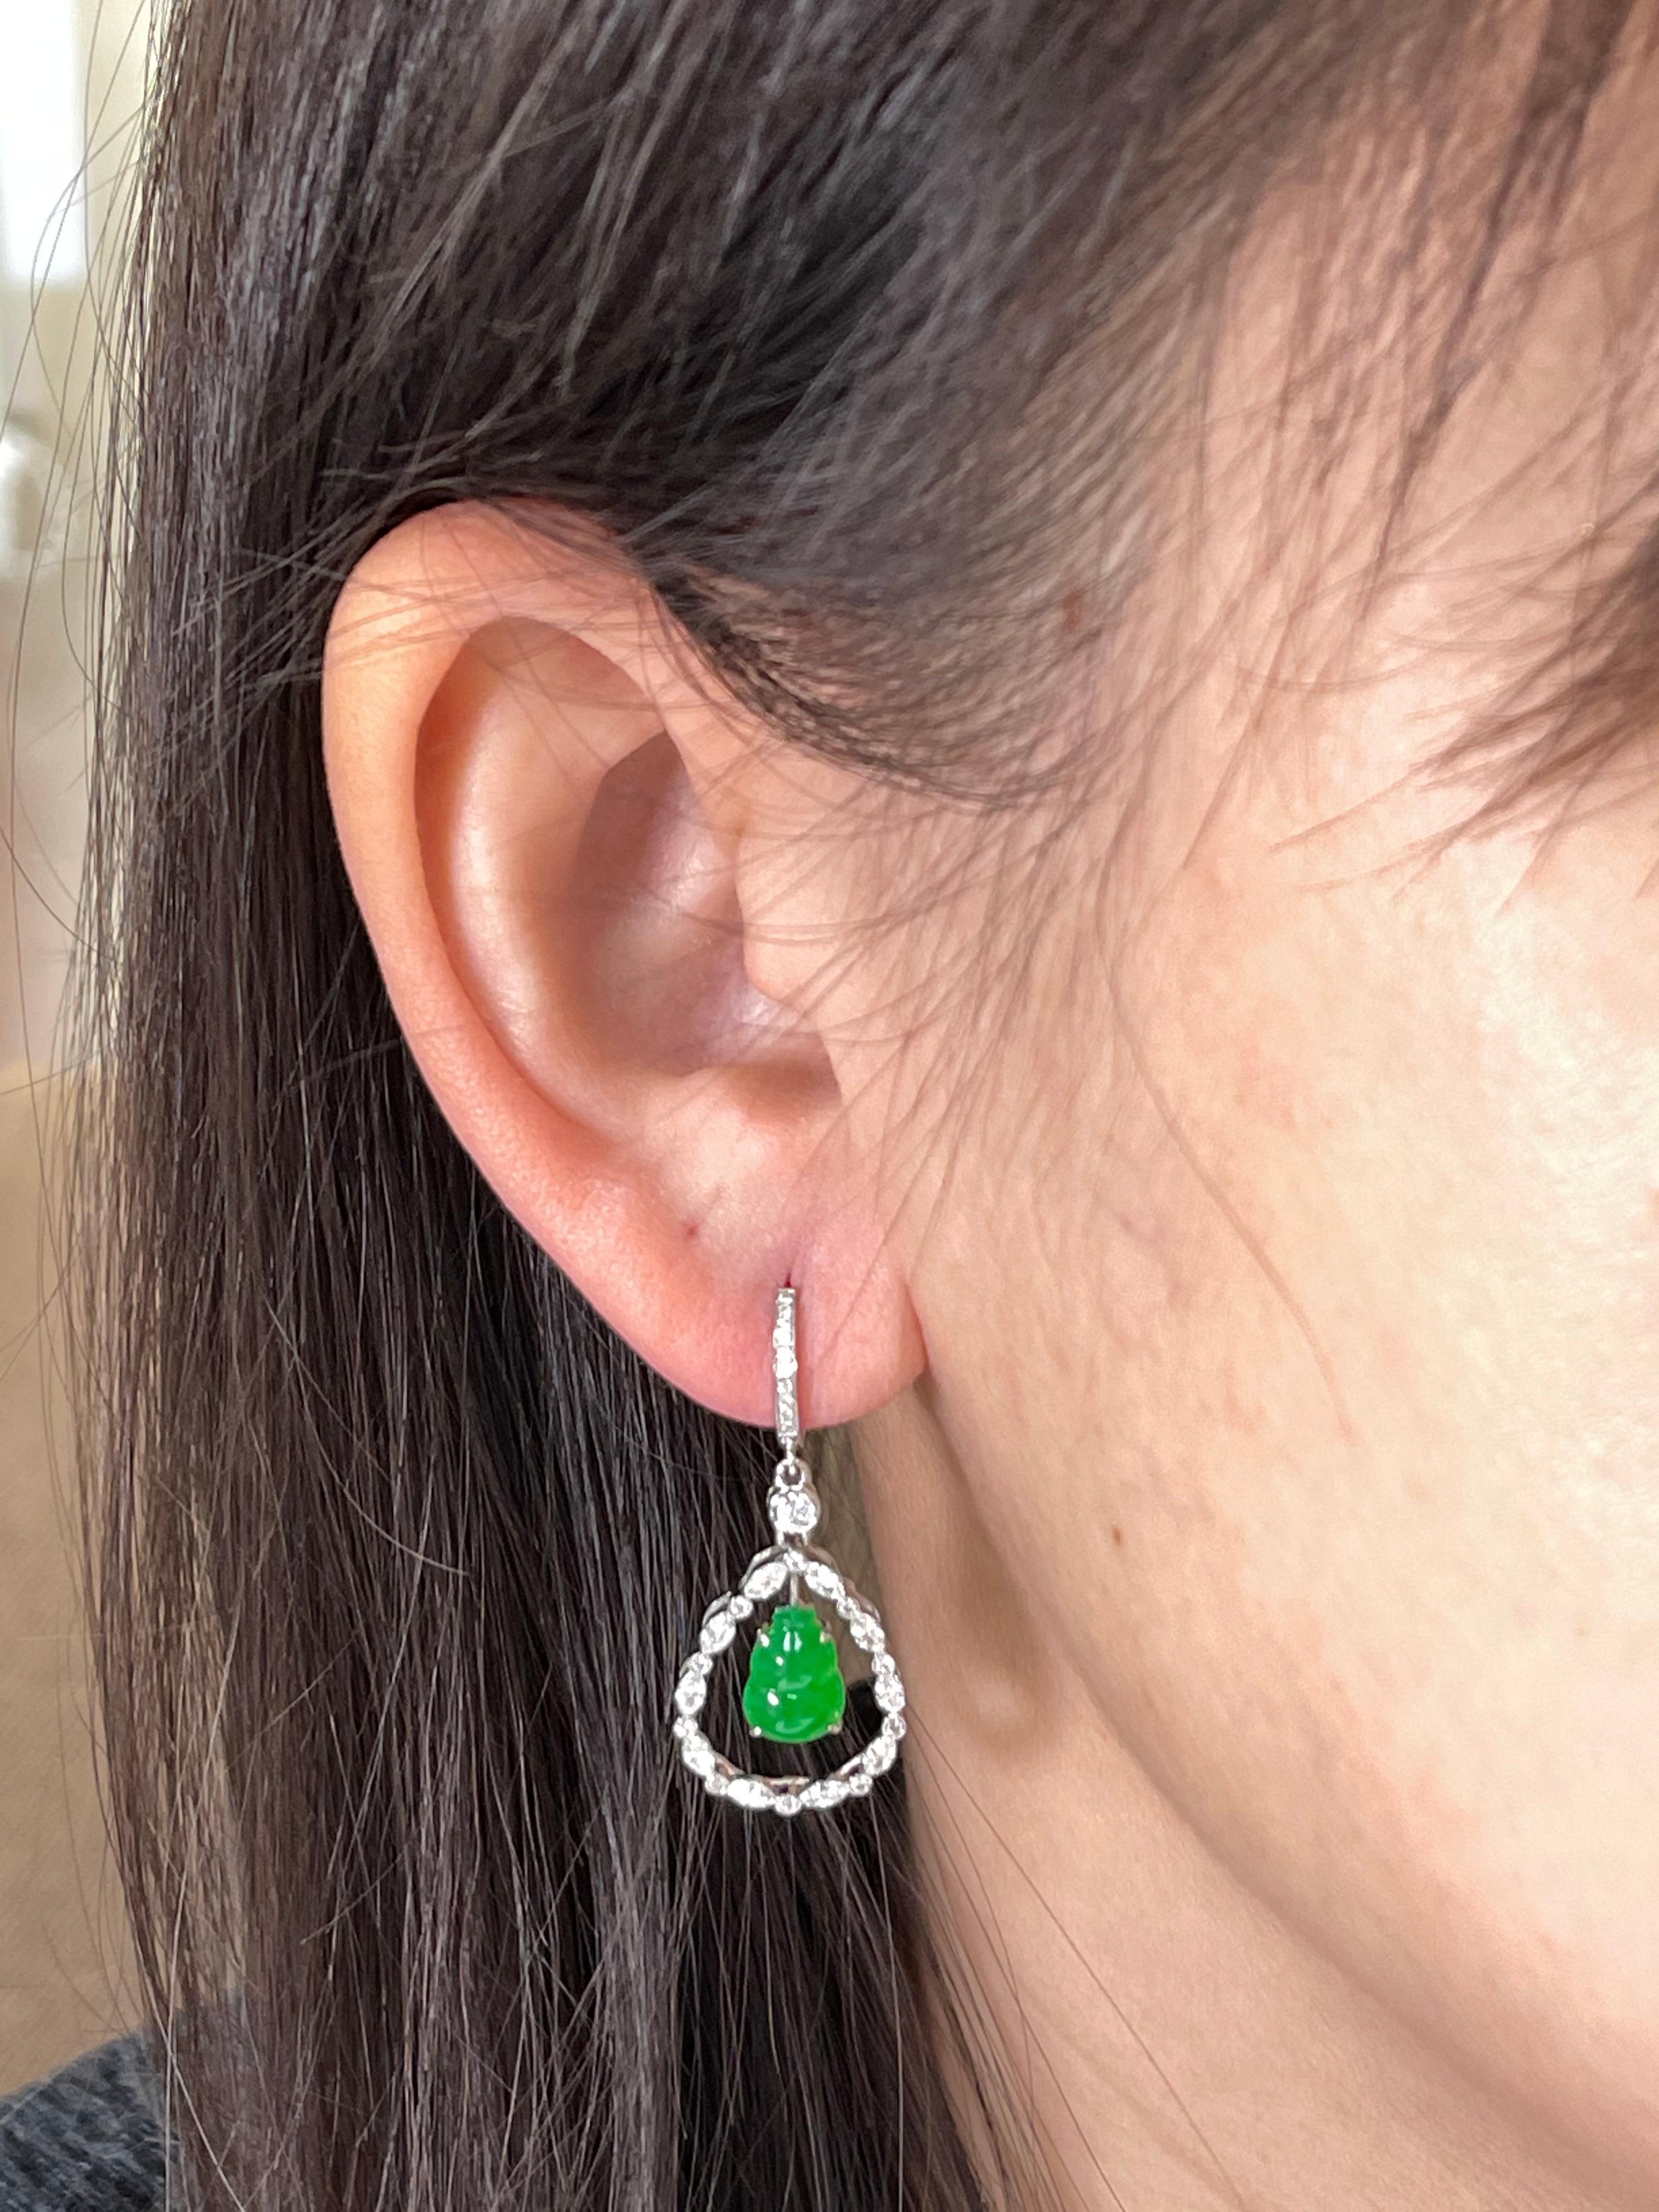 Here is a pair of natural imperial Jadeite Jade and diamond earrings with the best imperial green color. This color is rare and in high demand. It is certified by 2 different labs. The jade gourd represents the Fulu double, it protects peoples